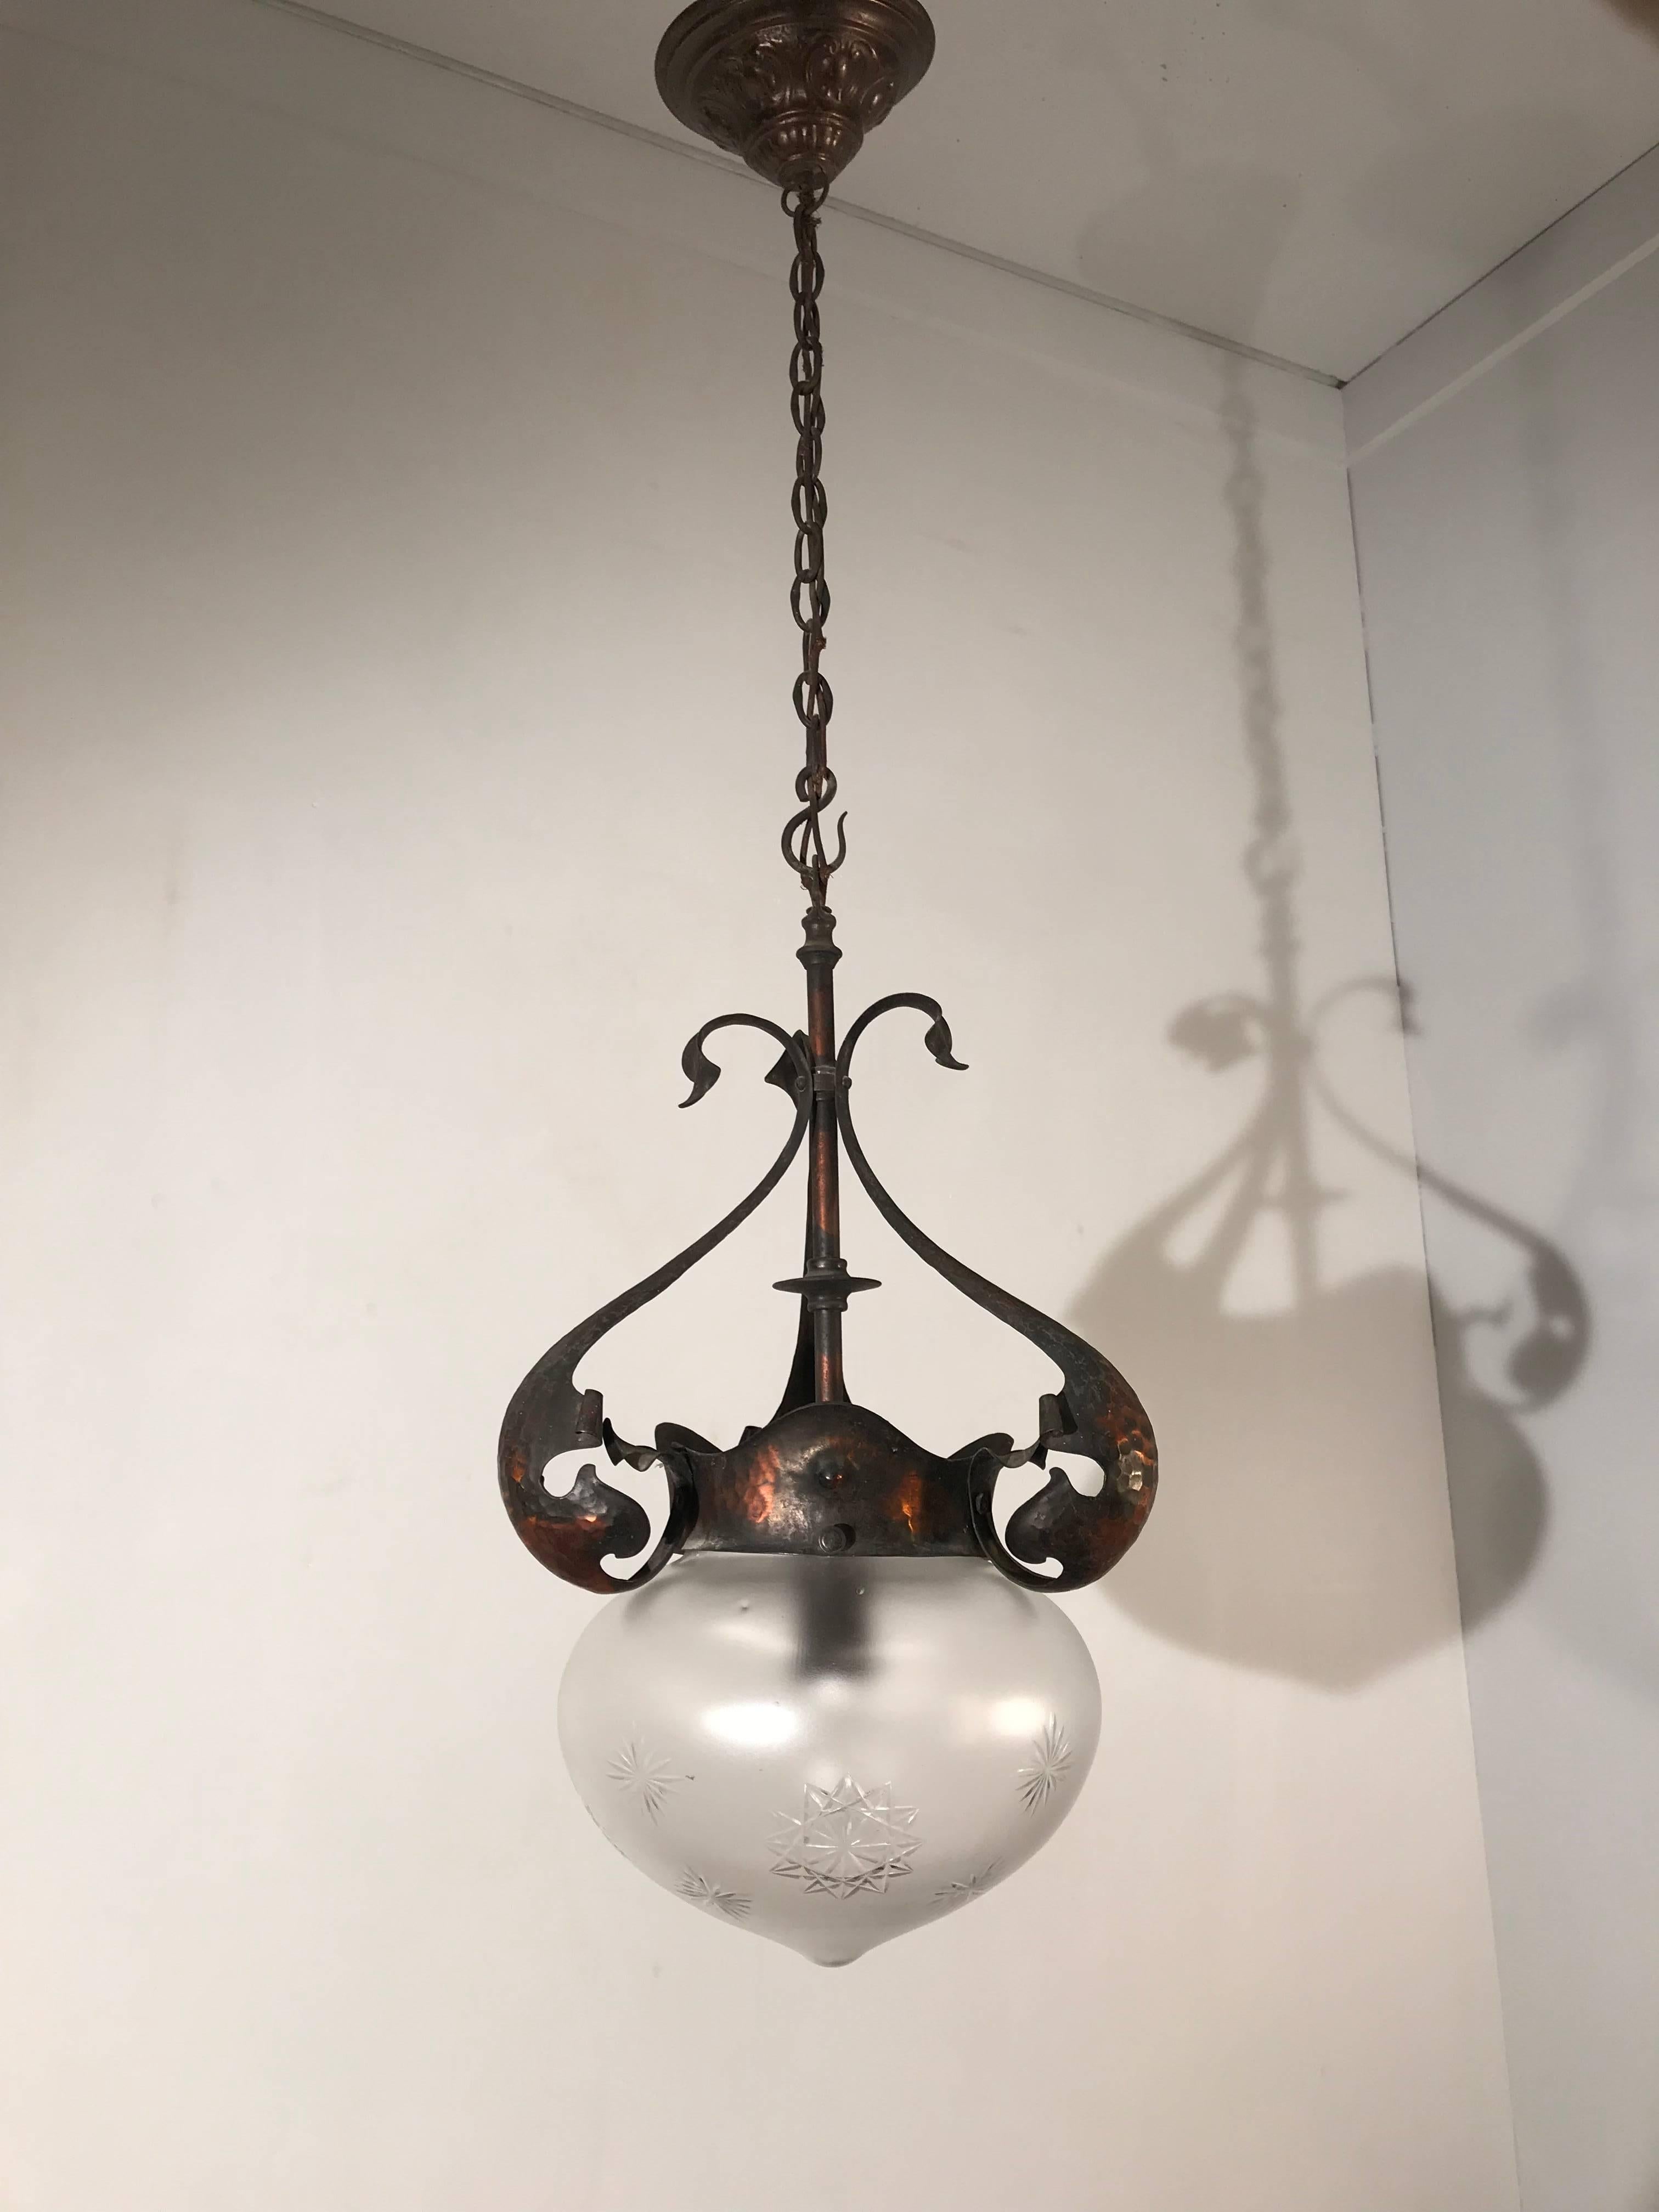 Benson style, handmade Arts & Crafts light fixture.

This early Arts & Crafts pendant has an aesthetically pleasing shape and a marvellous patina. This fine work of lighting art is perfectly hand-crafted and in very good condition. The hand-hammered